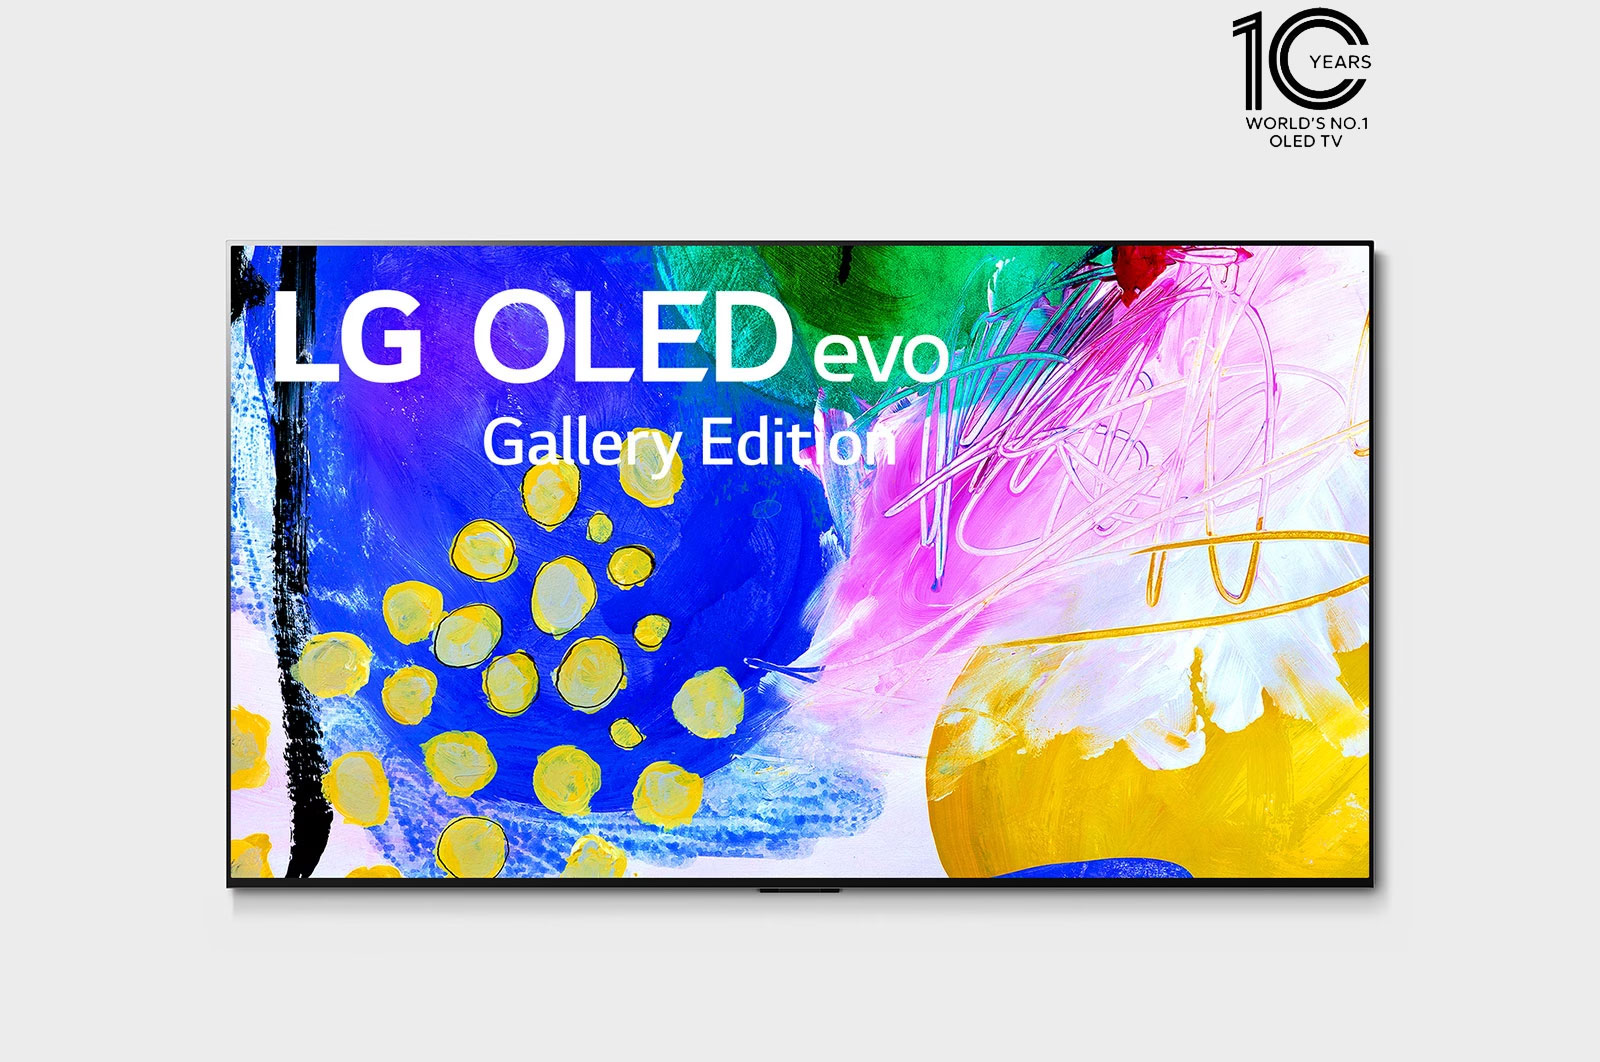 LG 4K OLED Smart TV 77 inch Series G2 with gallery design, a9 Gen5